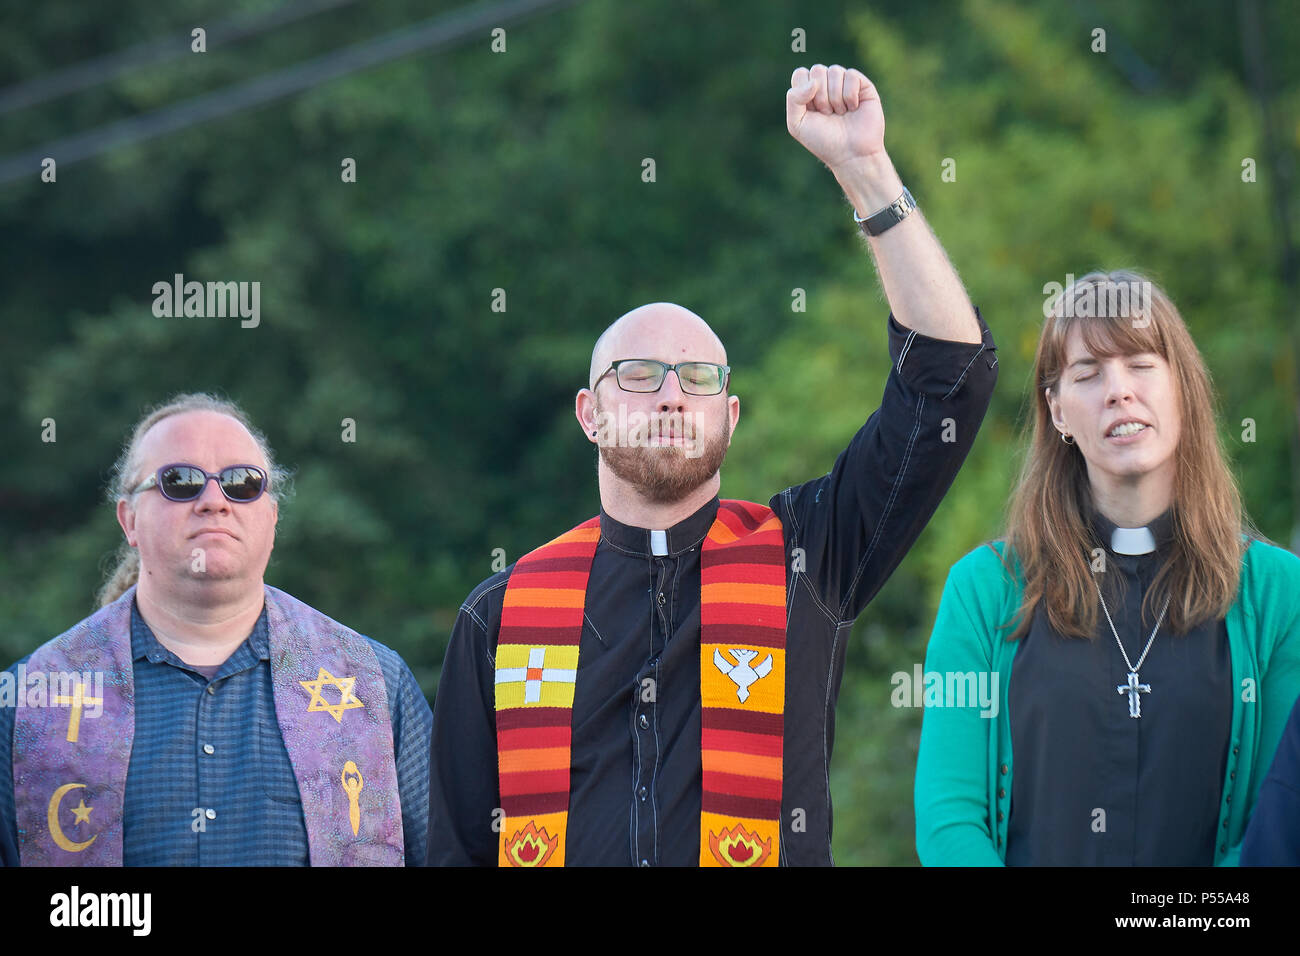 Seatac, Washington, USA. 24 June, 2018.  Clergy pray outside the fence surrounding the Federal Detention Center in Seatac, Washington, early June 24 during a prayer vigil in support of immigrant parents inside the prison who've been separated from their children. The vigil was sponsored by the United Methodist Church.  Credit: Paul Jeffrey/Alamy Live News Stock Photo